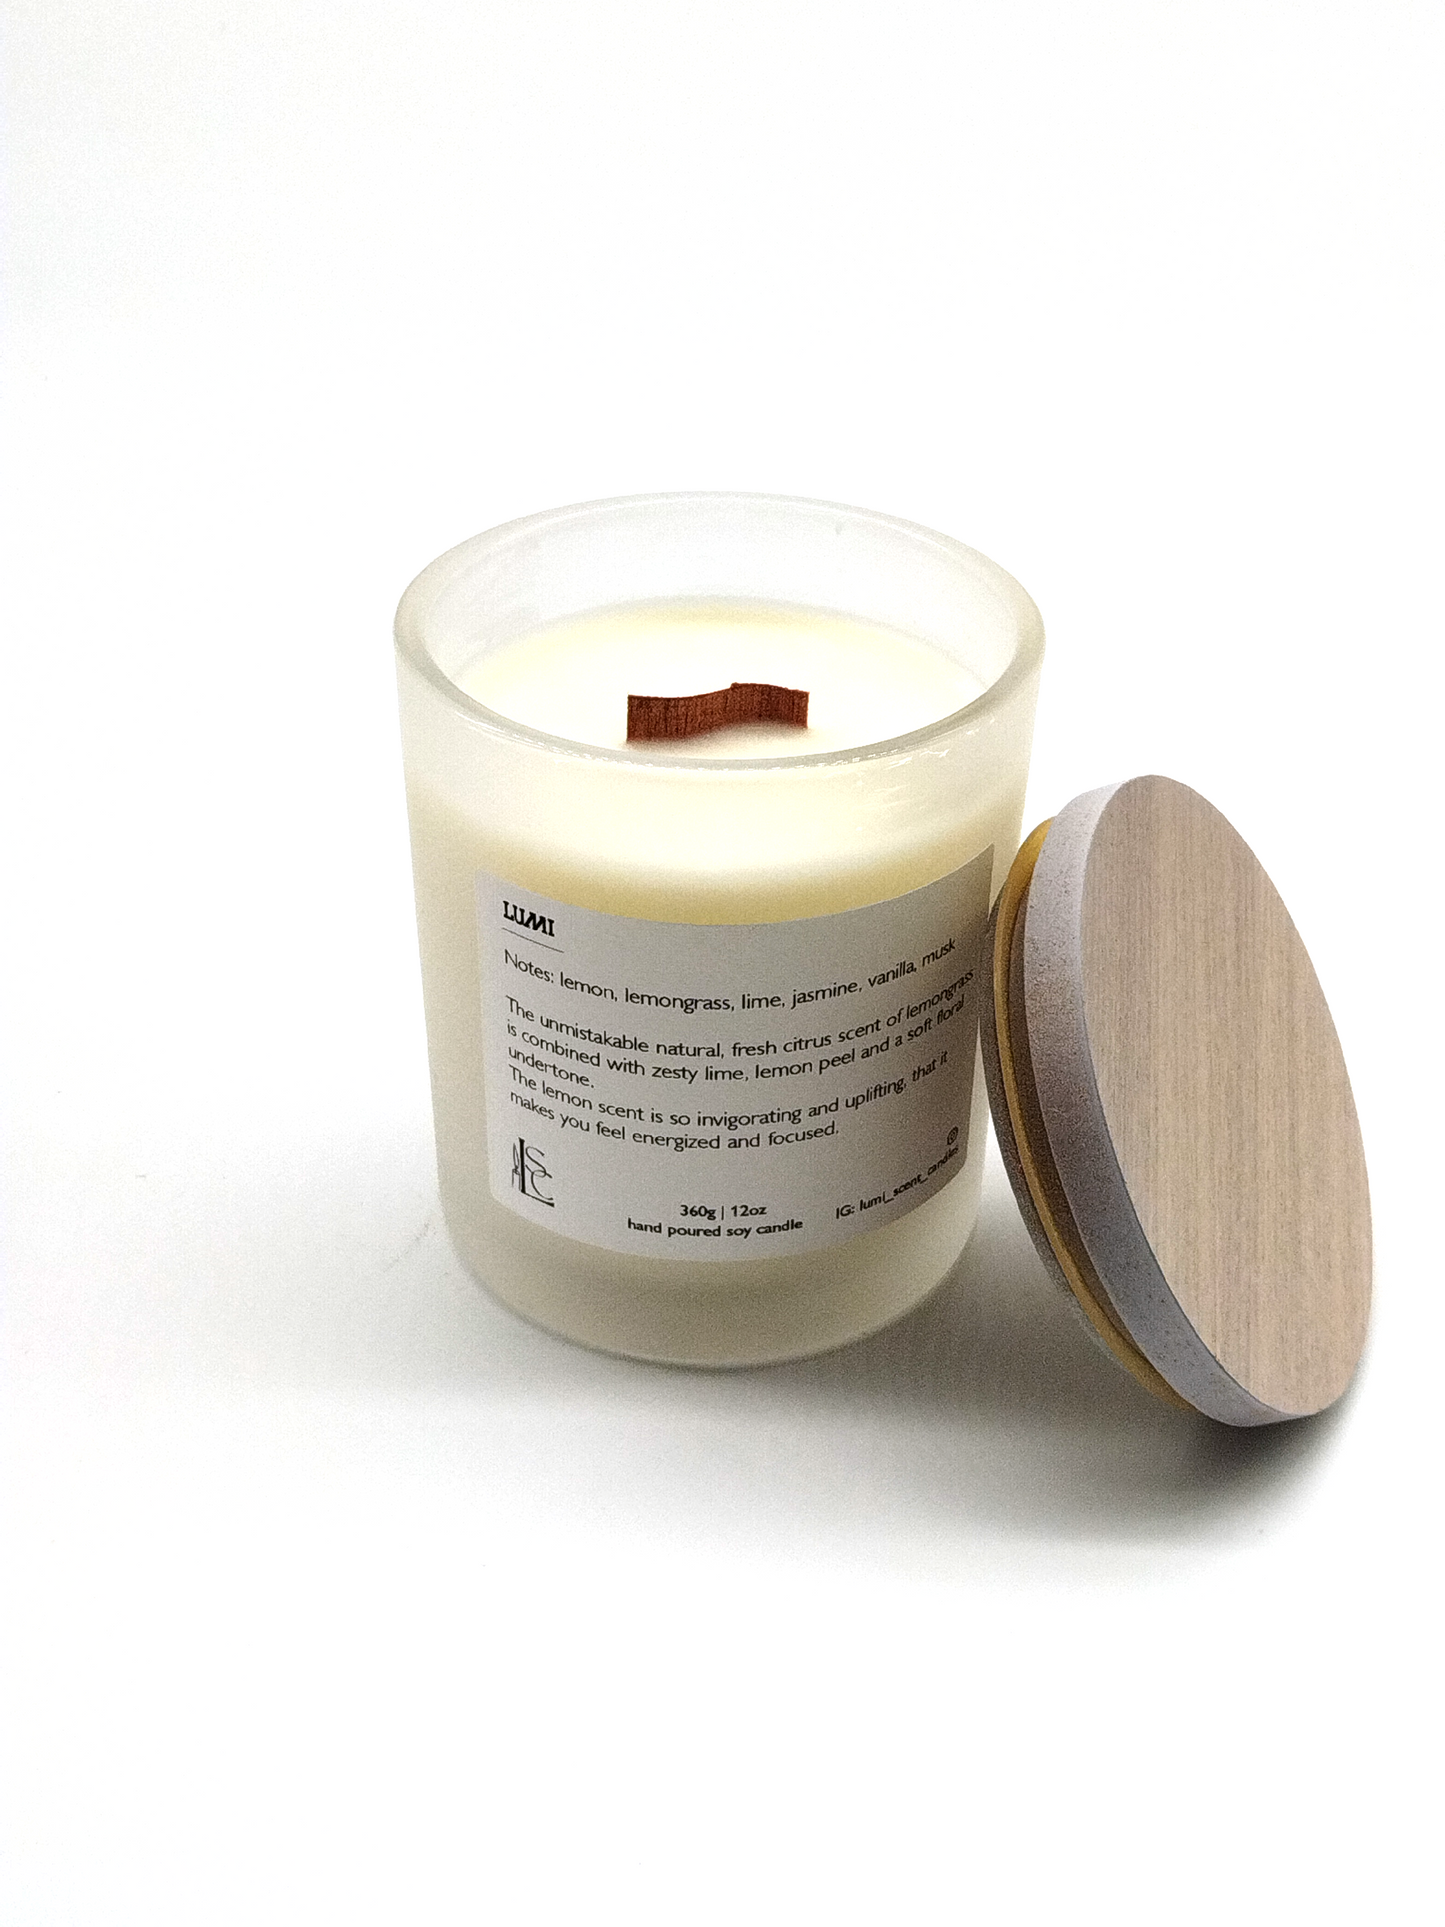 LUMI SCENT CANDLES VARIETIES, HAND POURED SOY-WAX WITH WOODEN WICKS.